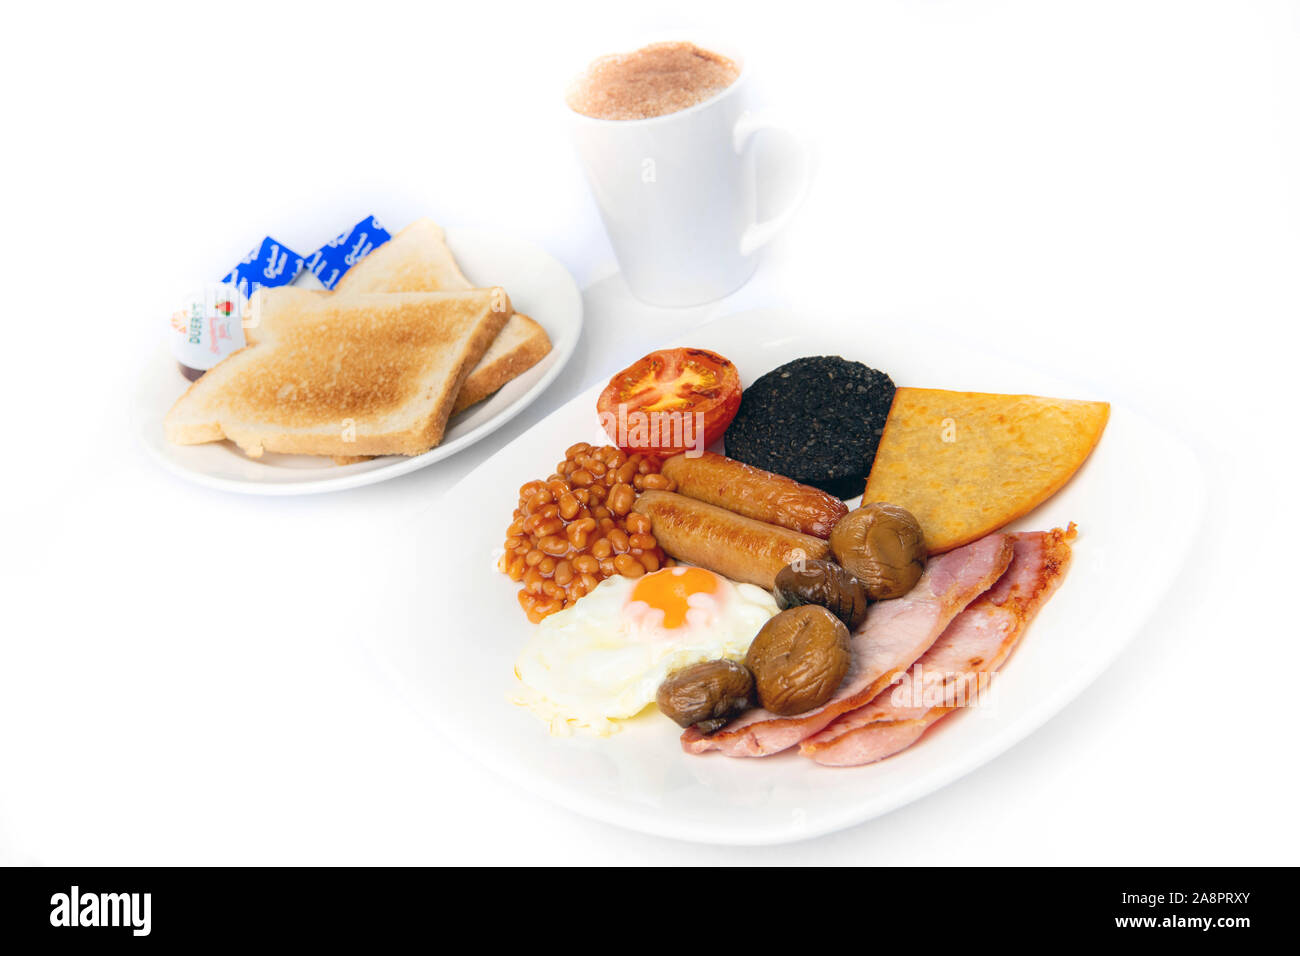 North Sea Ferries, Food Pictures, Aberdeen Stock Photo